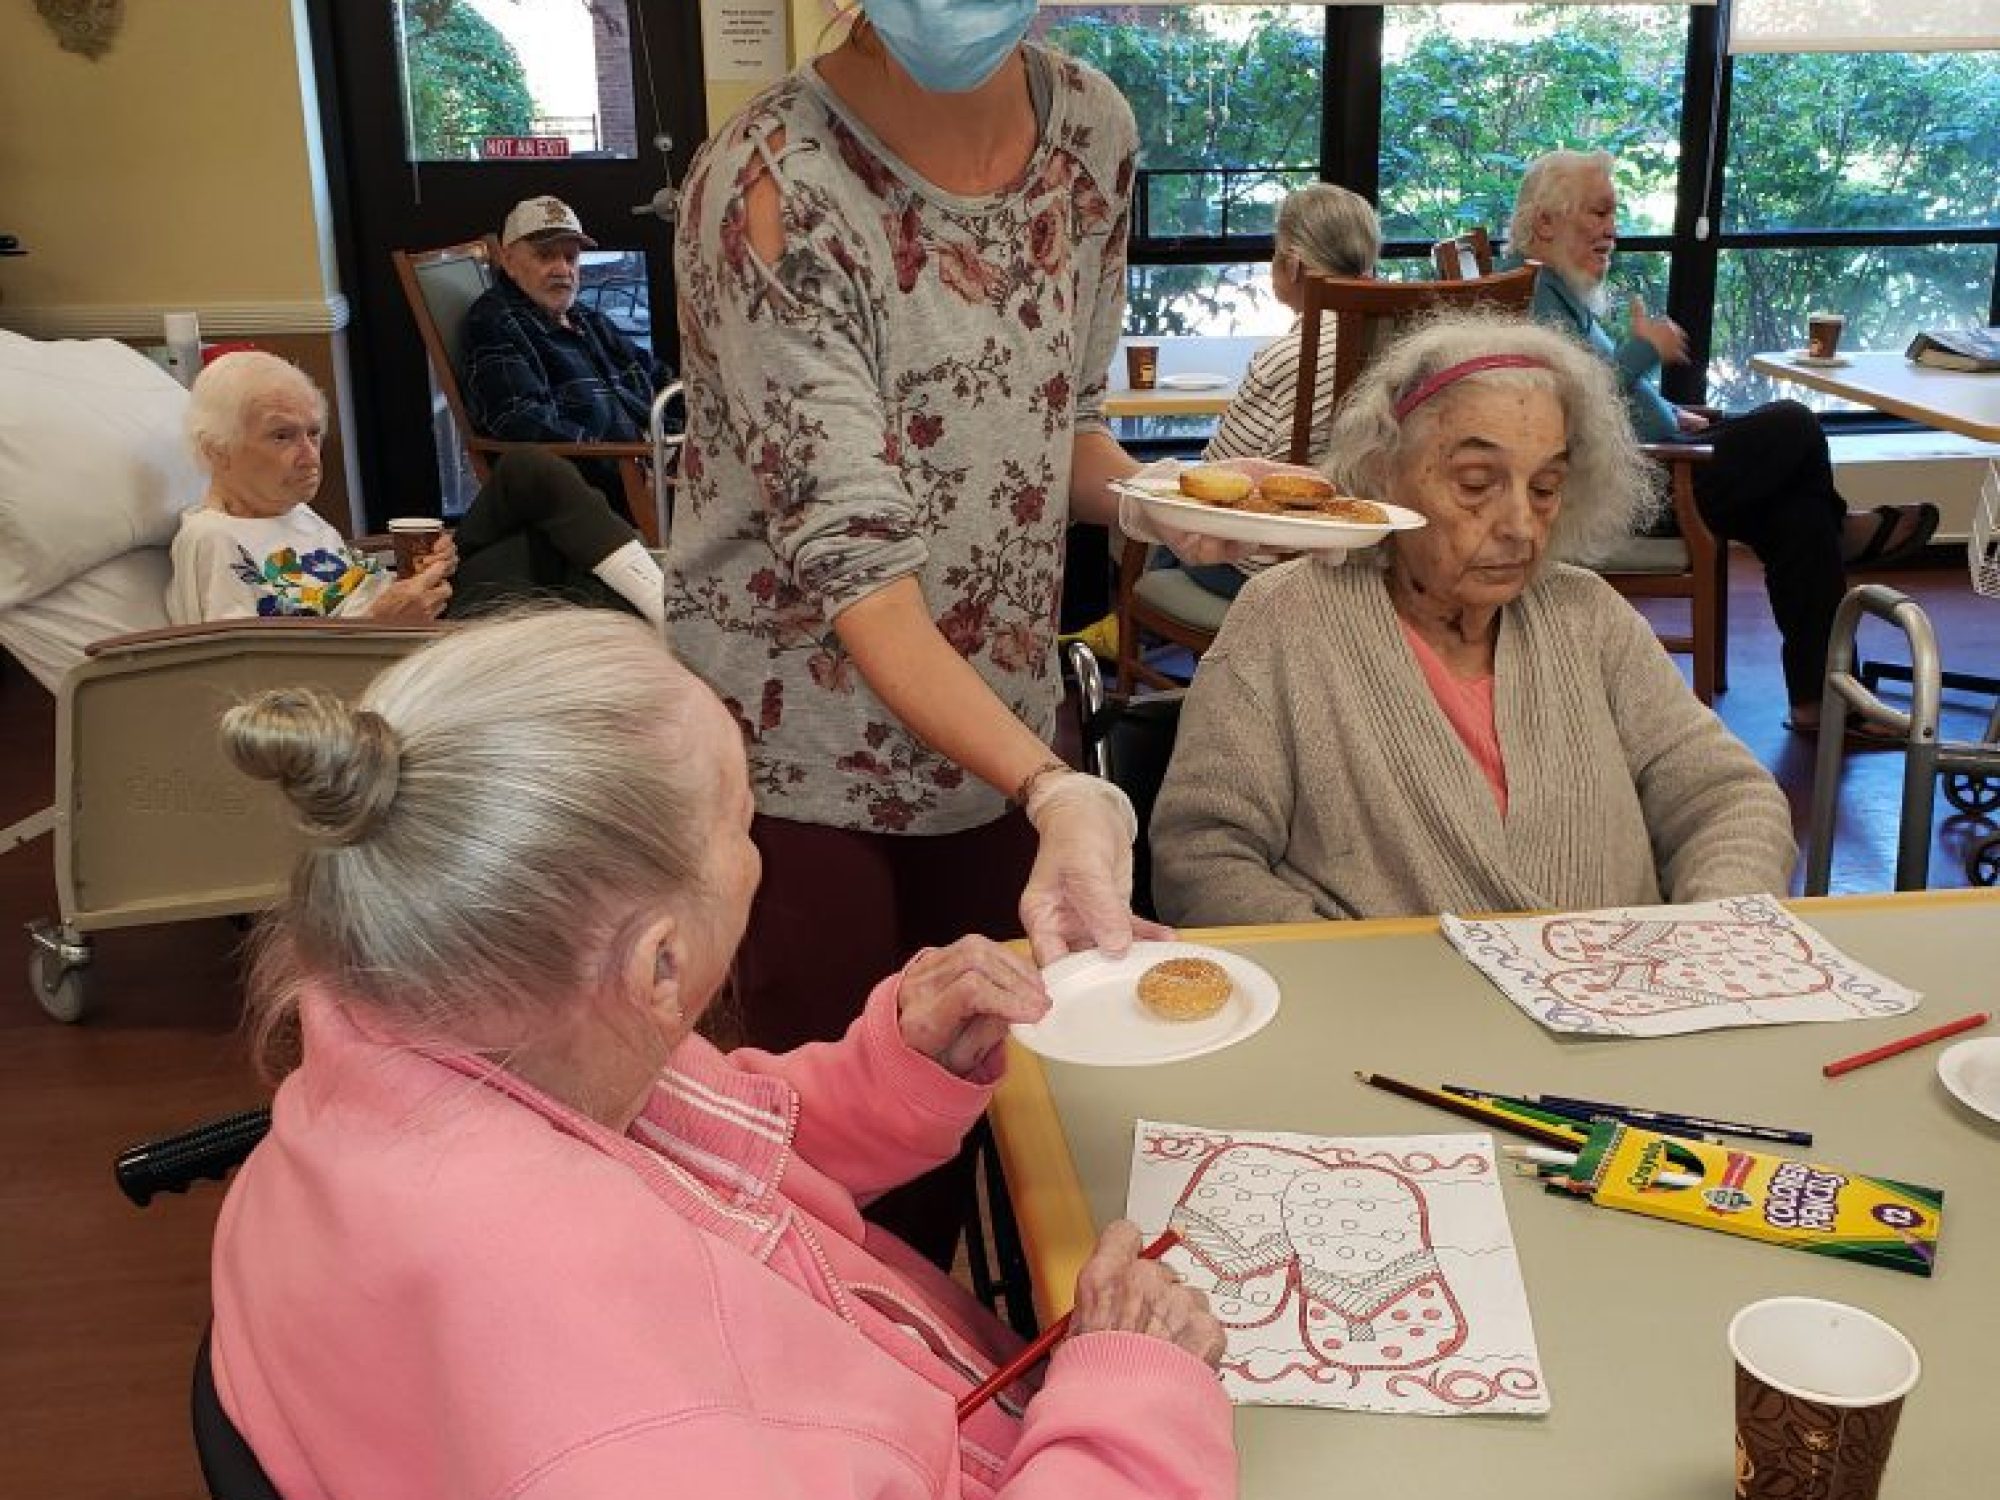 Holly, a staff member at JNH, hands out homemade donuts to residents.